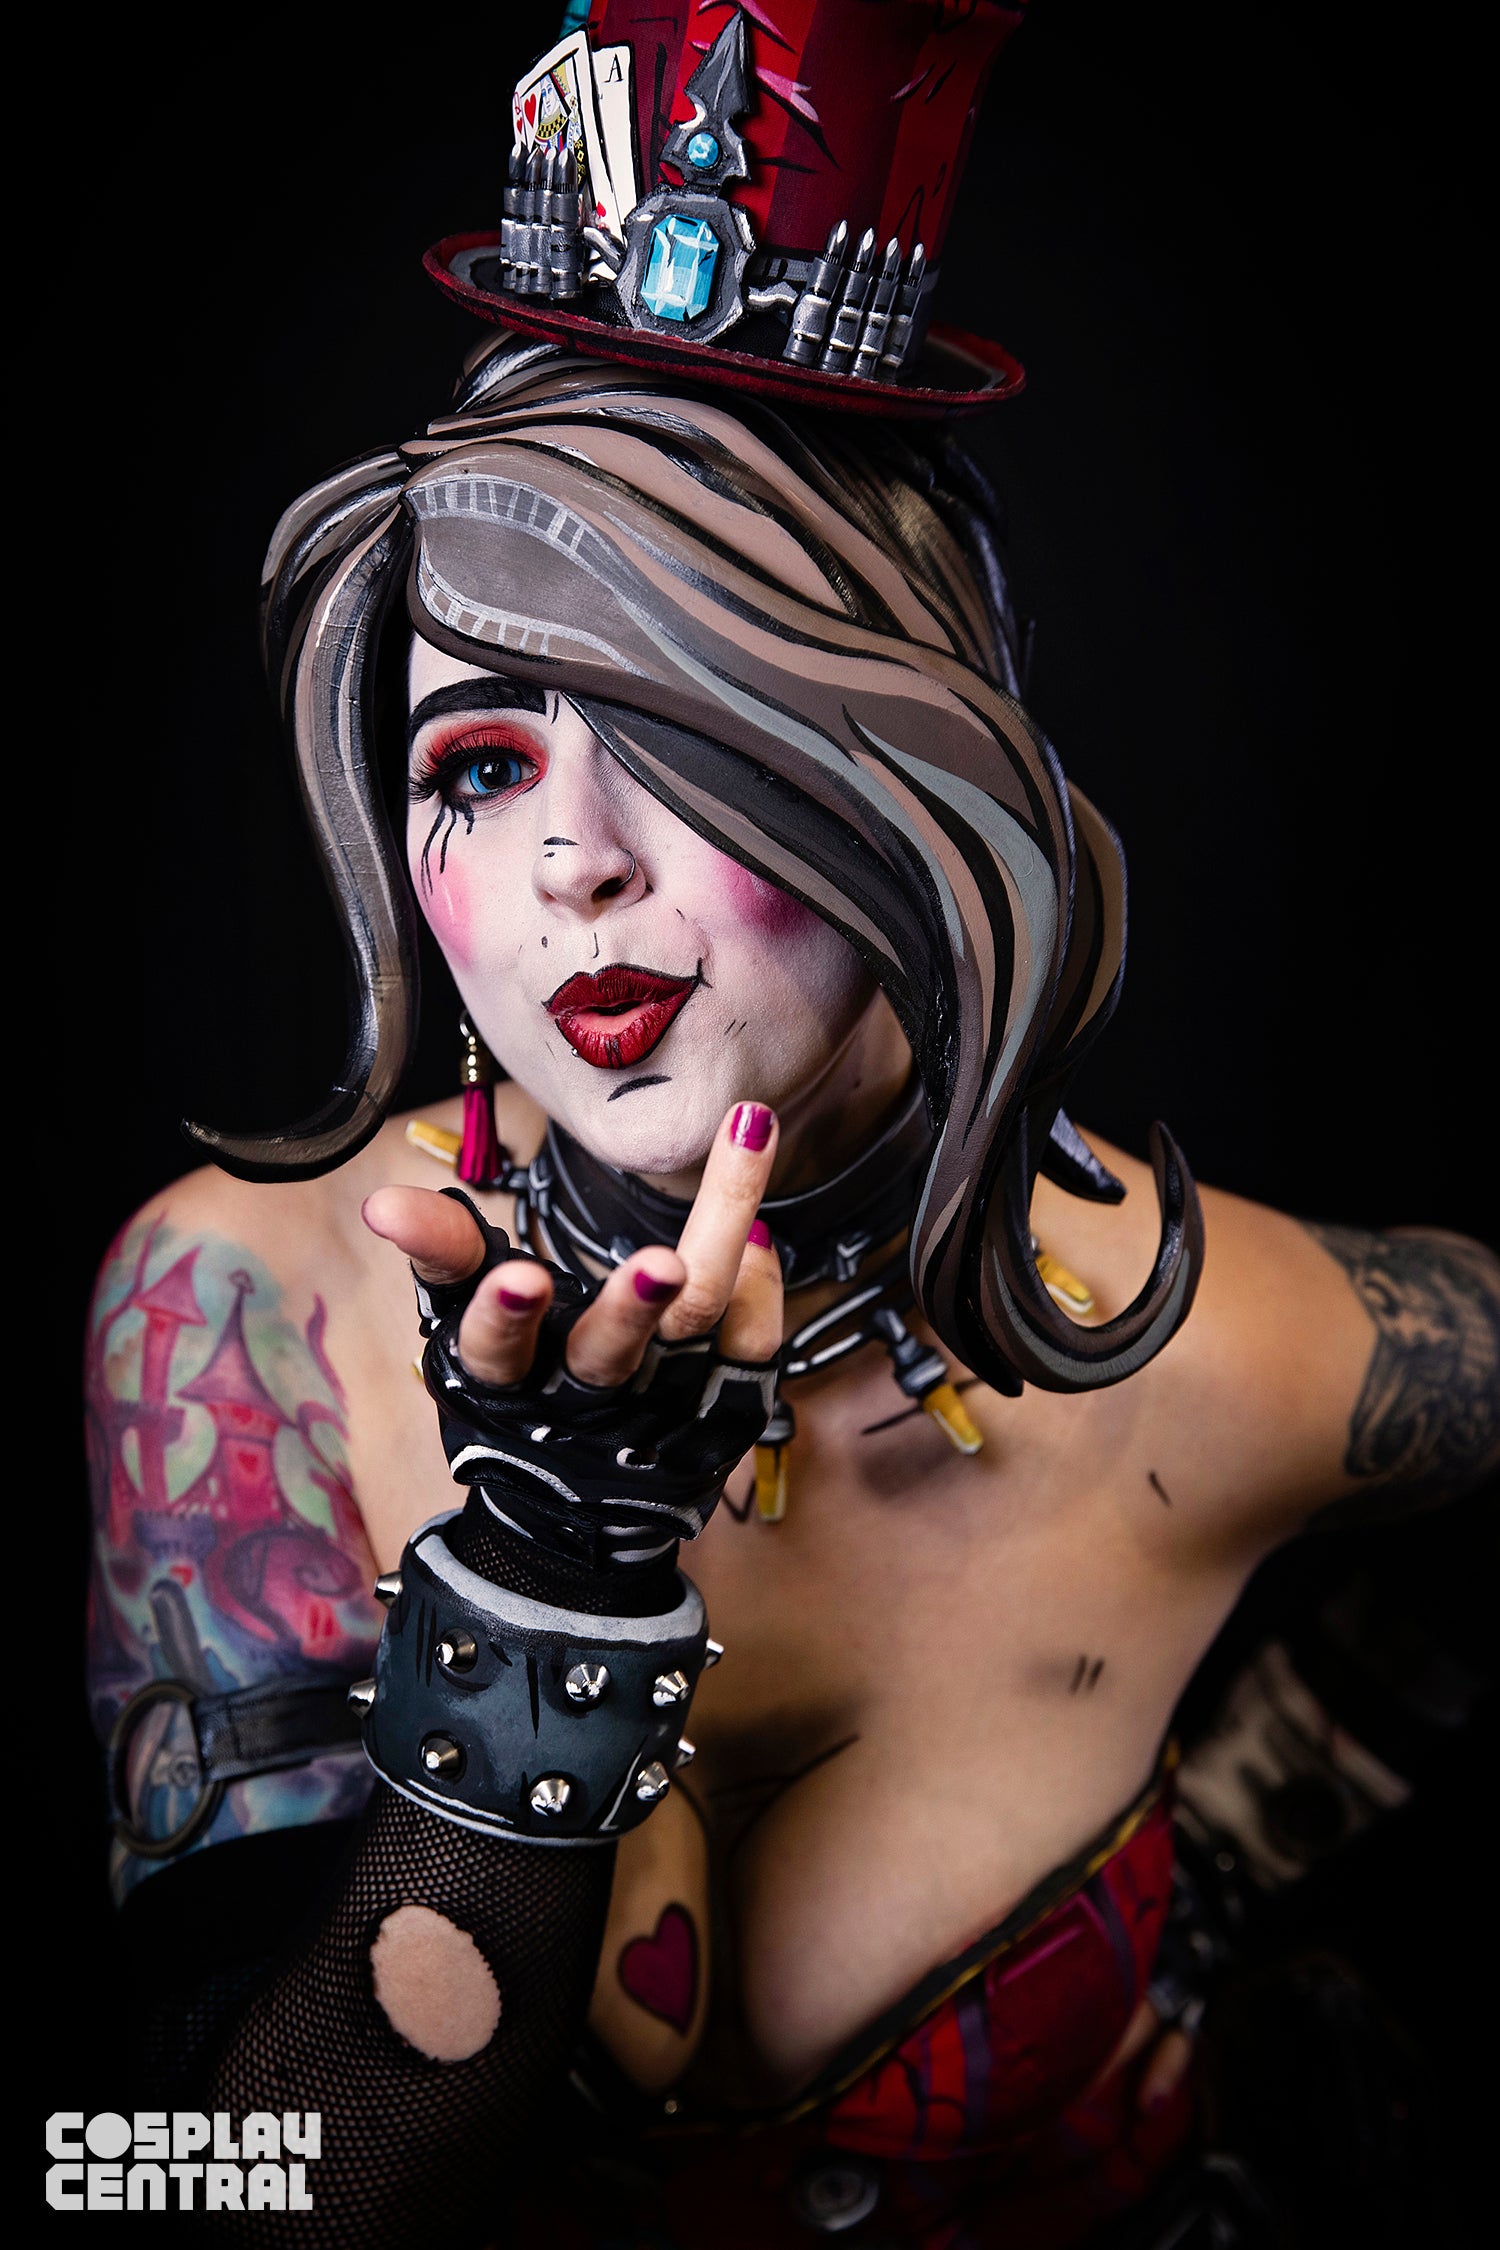 Jessilyn Cupcake's Borderlands cosplay from New York Comic Con 2019